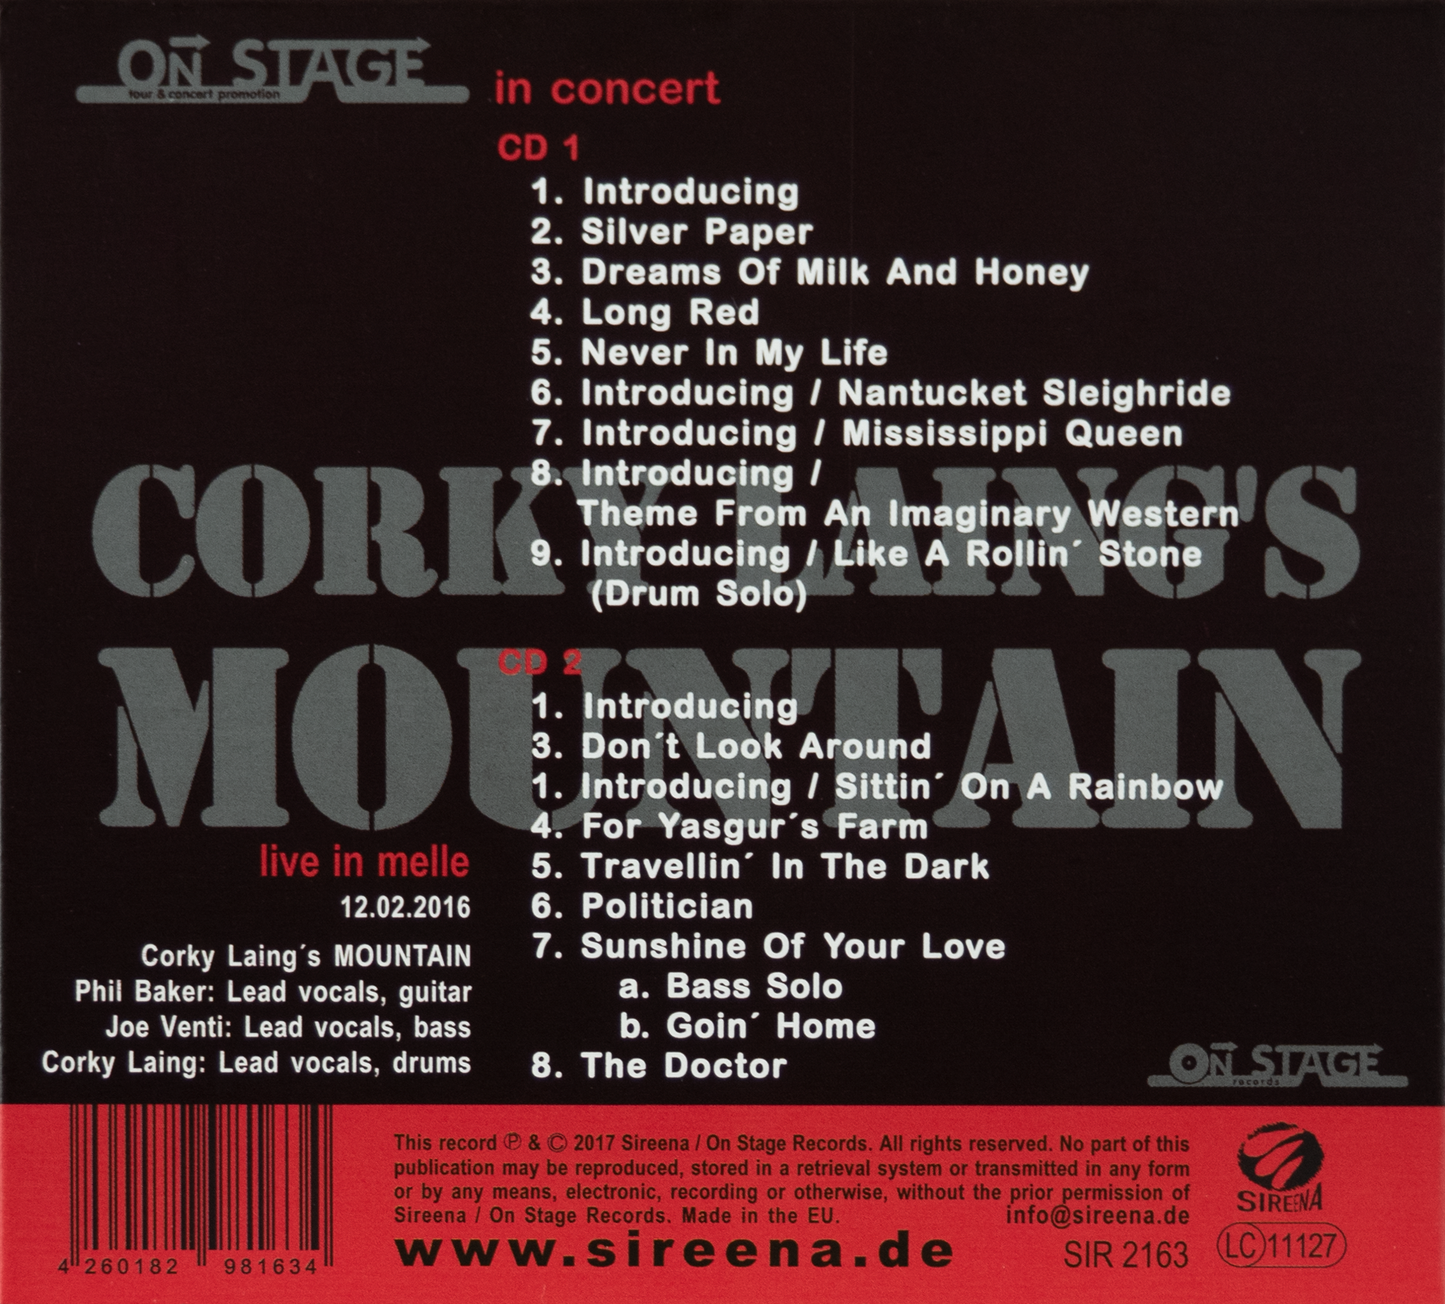 Corky Laing's MOUNTAIN - live in Melle, 2CDs